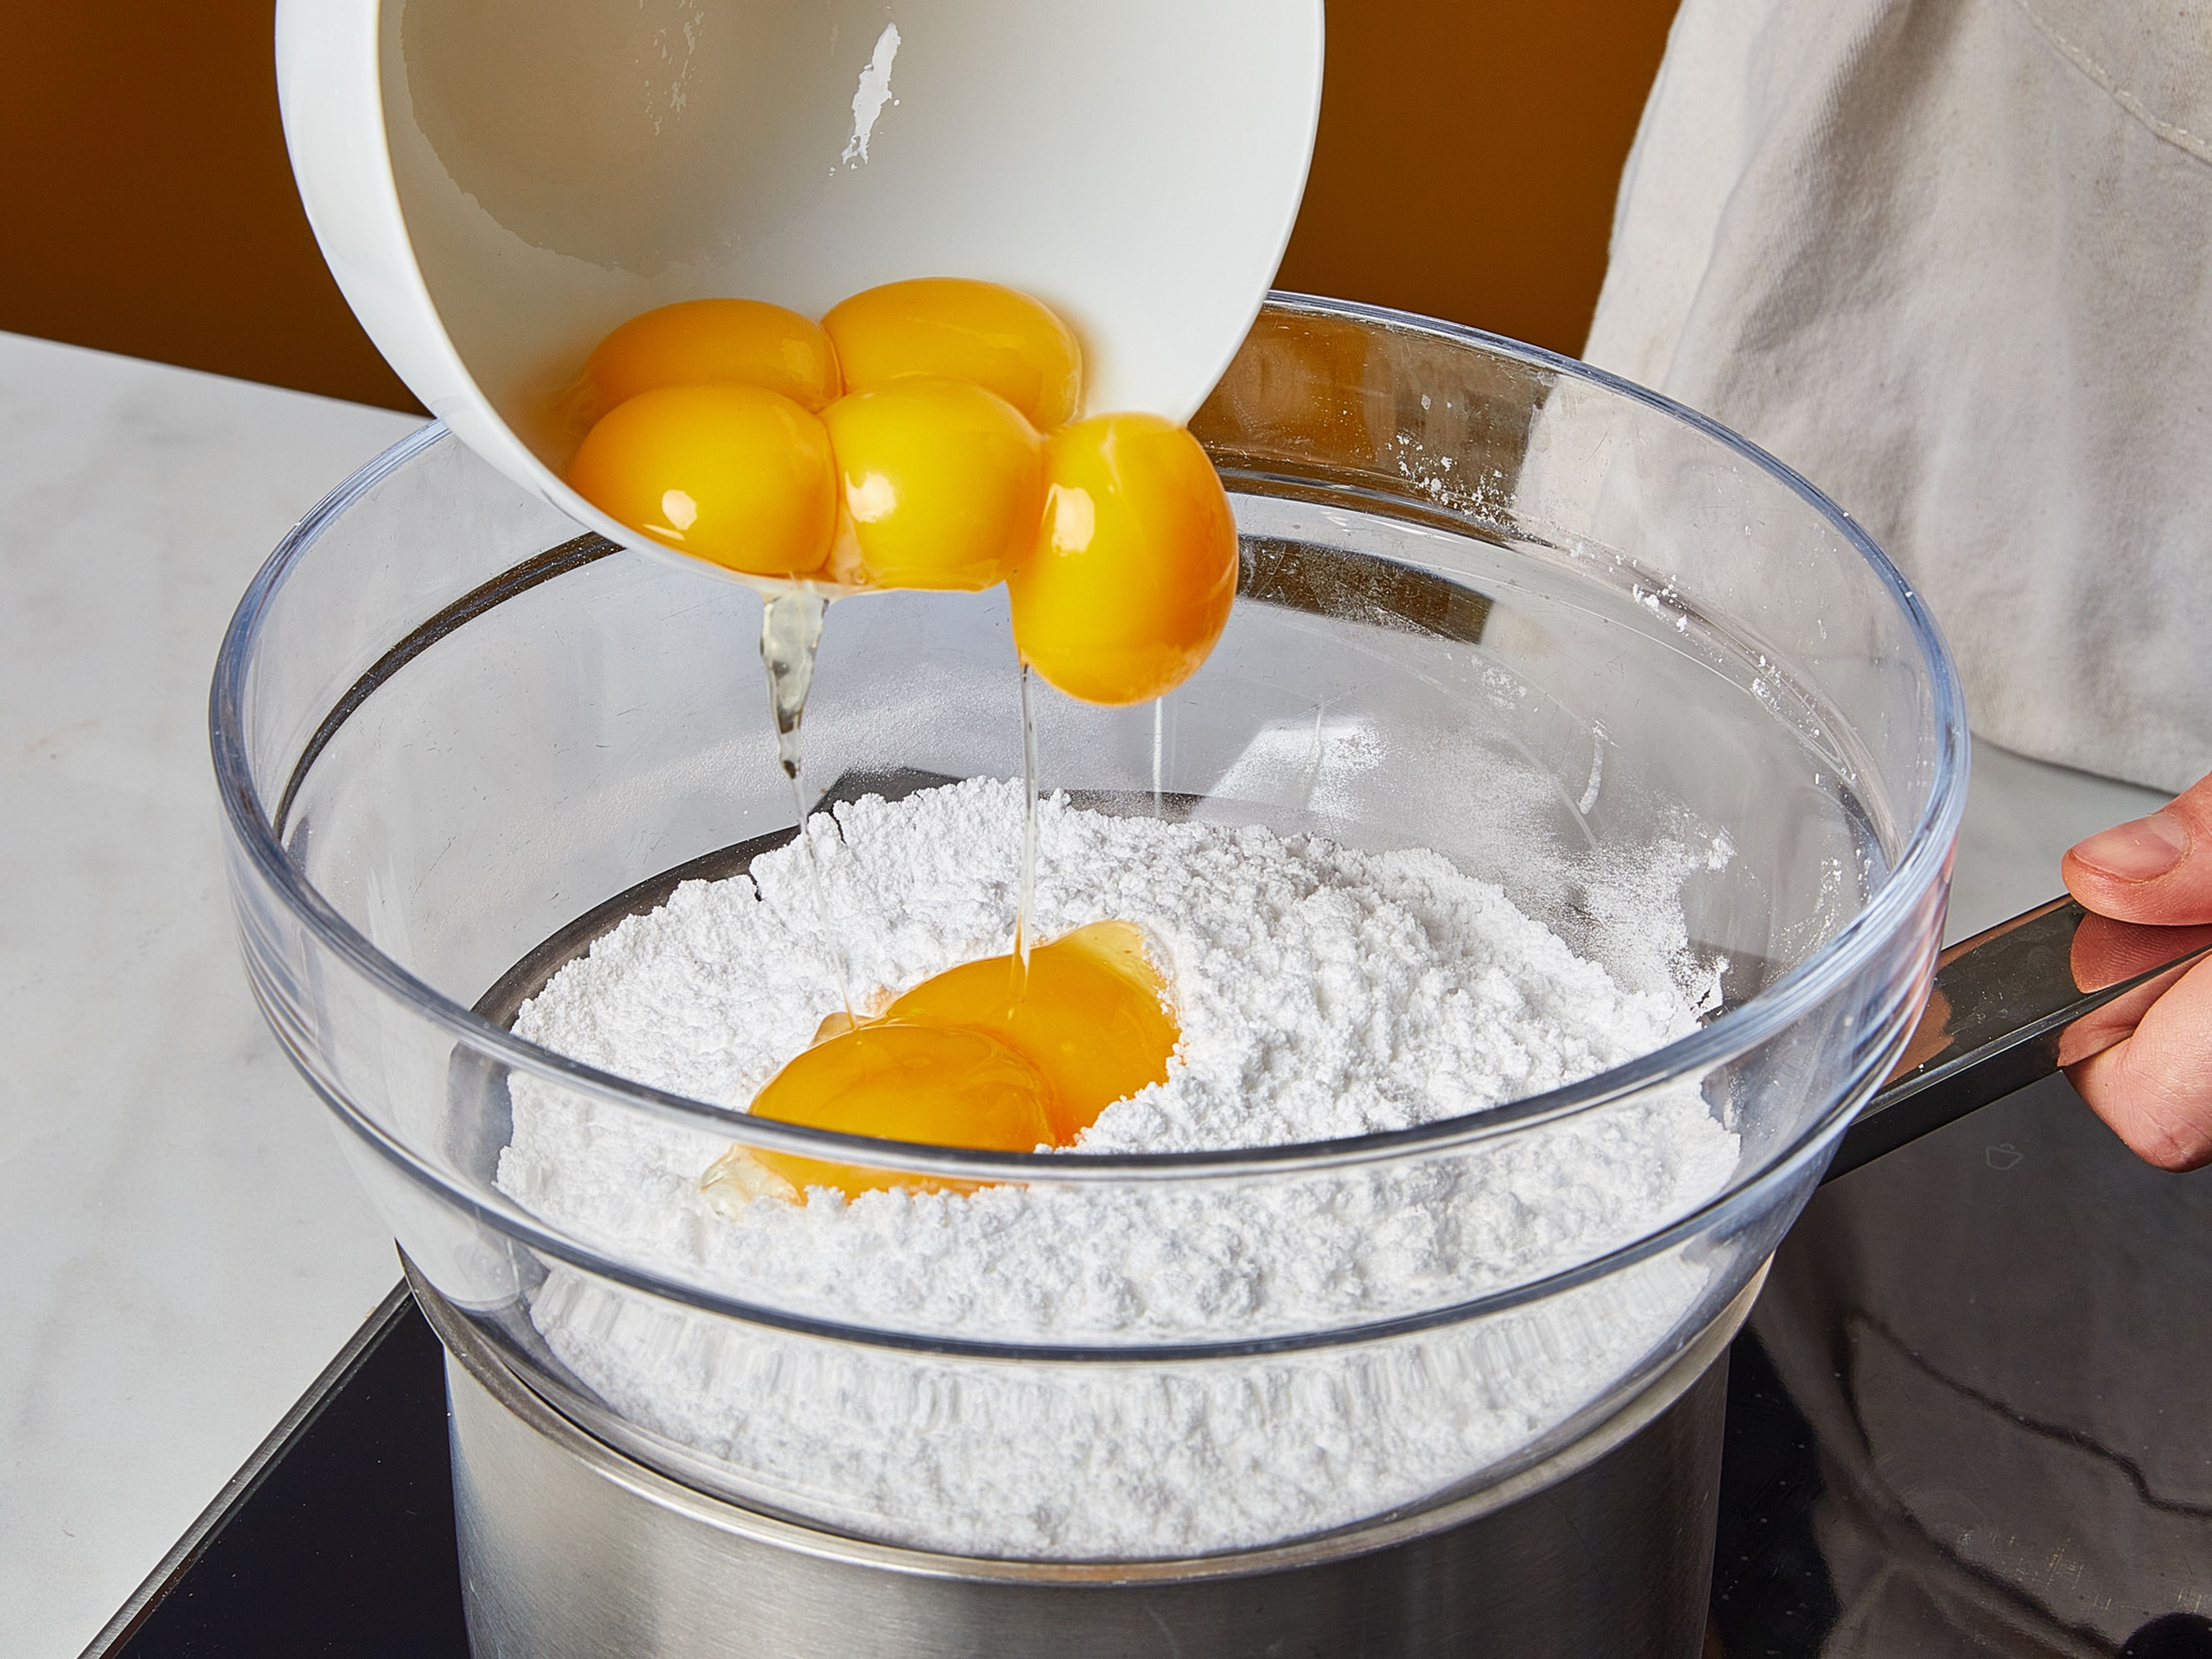 For the water bath (bain-marie), fill a pot with a few inches of water and set on medium to low heat, so it barely boils. Sift confectioner's sugar into a heatproof round-bottomed bowl. Place the bowl over the pot so that the bowl sits well on the rim but does not touch the water. Add egg yolks to the bowl and whisk immediately in the bain-marie (approx. 60°C/140°F) using a whisk or hand mixer until everything is thick and smooth. Make sure that the yolks do not curdle by stirring constantly and not letting the mixture get too hot.